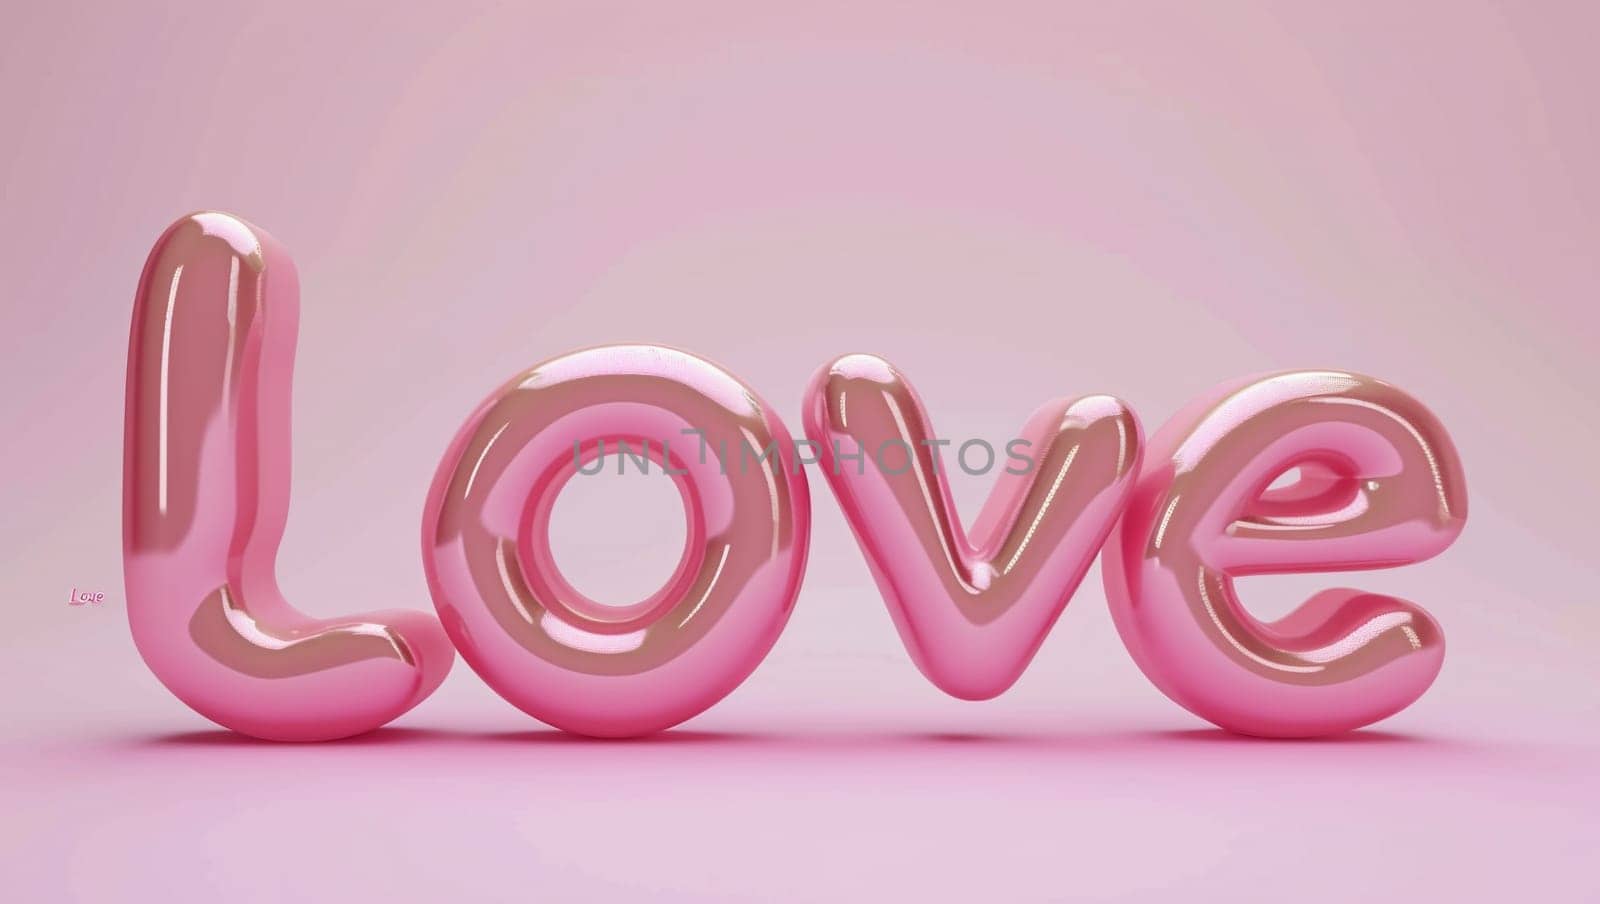 The word Love in red on a red background. Balloons are displayed in a row. Valentine's Day. 3D rendering, computer graphics. High quality photo